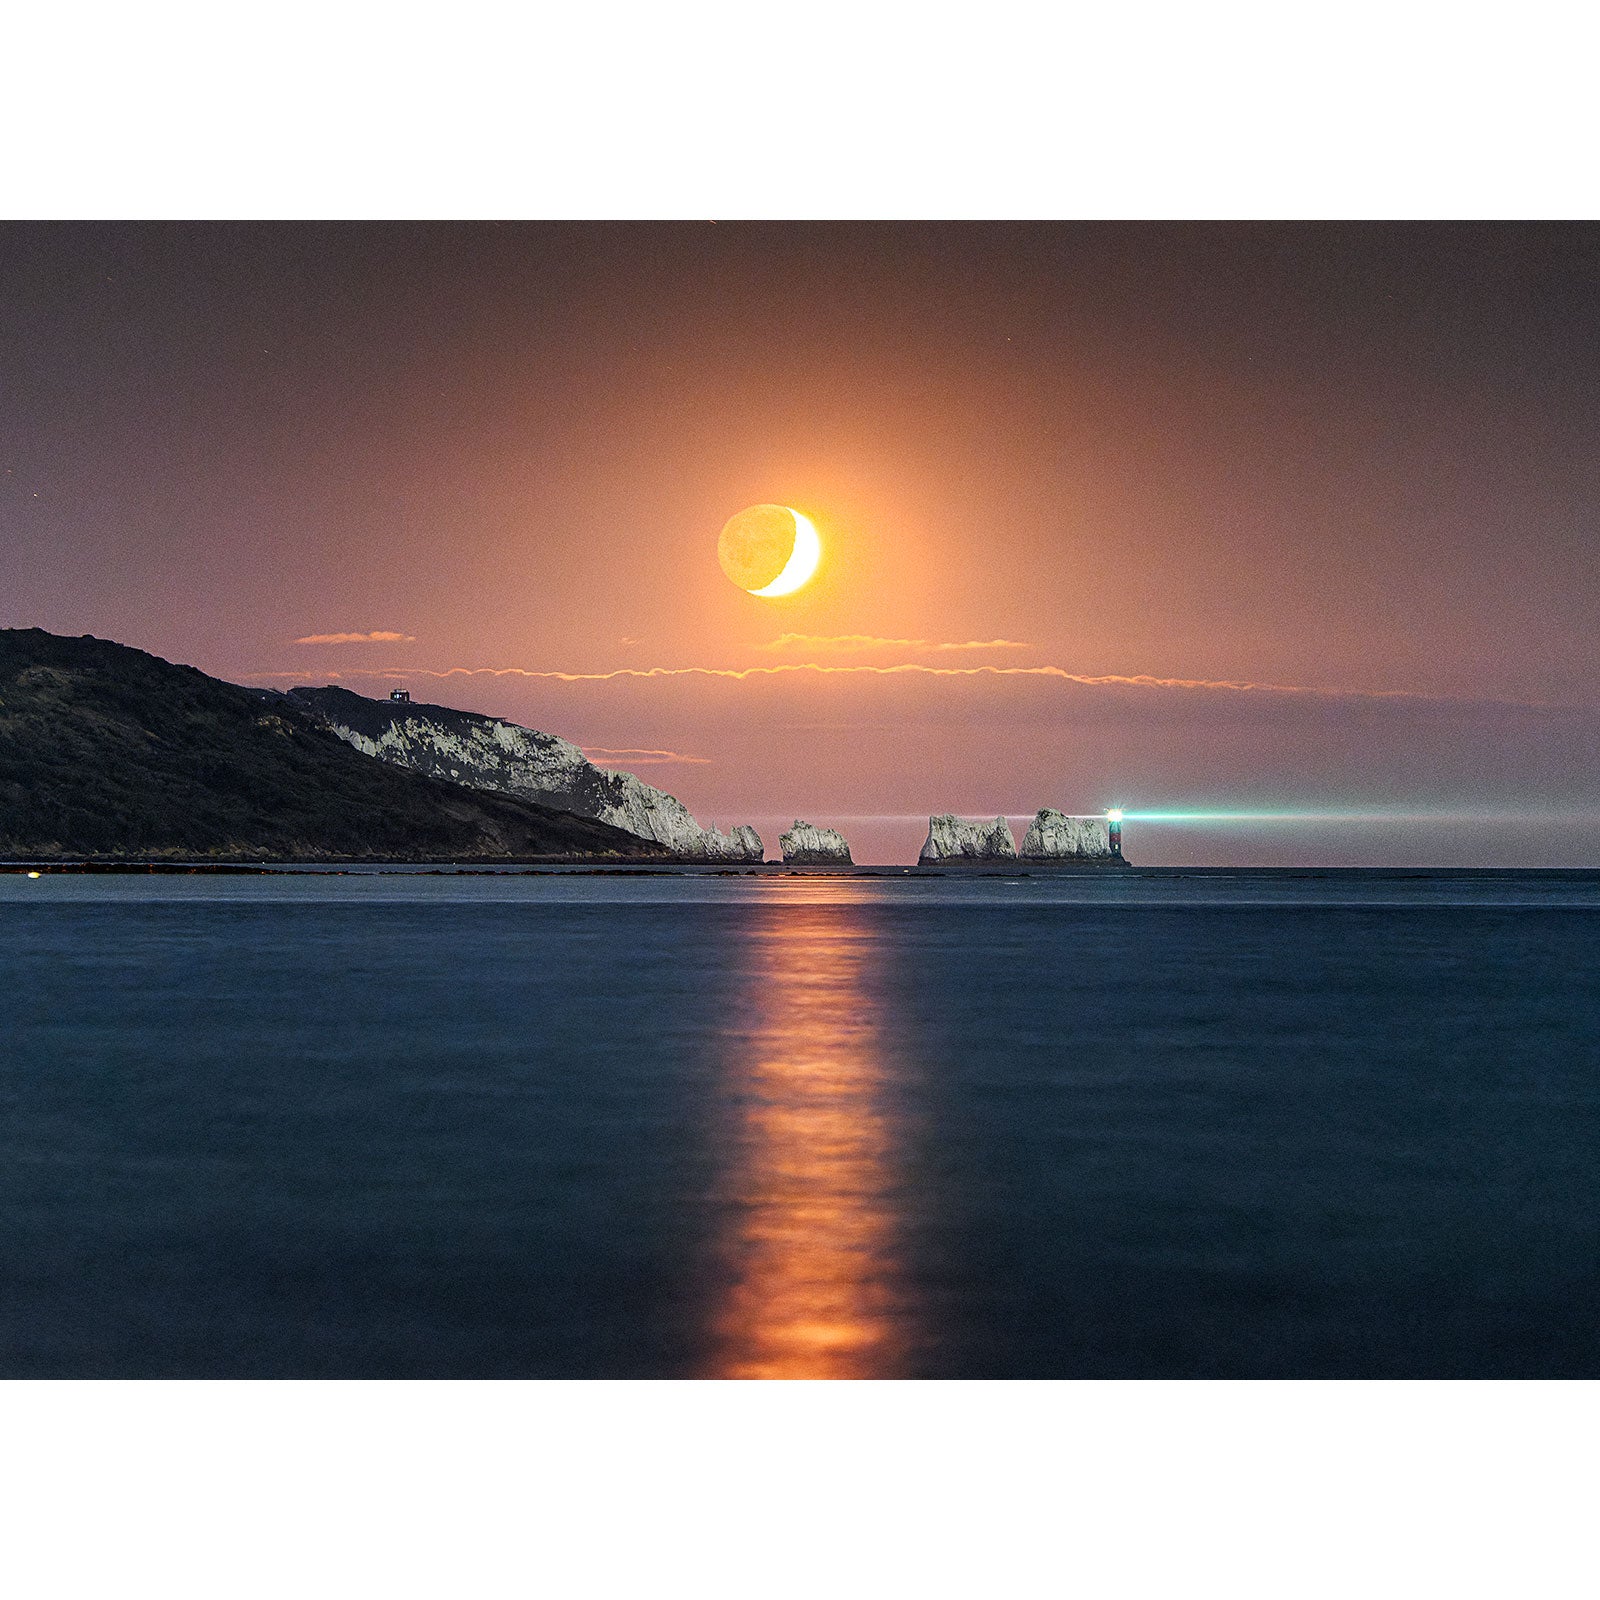 Crescent Moonset at The Needles over a calm sea with a cliff coastline in the distance on the Isle of Wight by Available Light Photography.